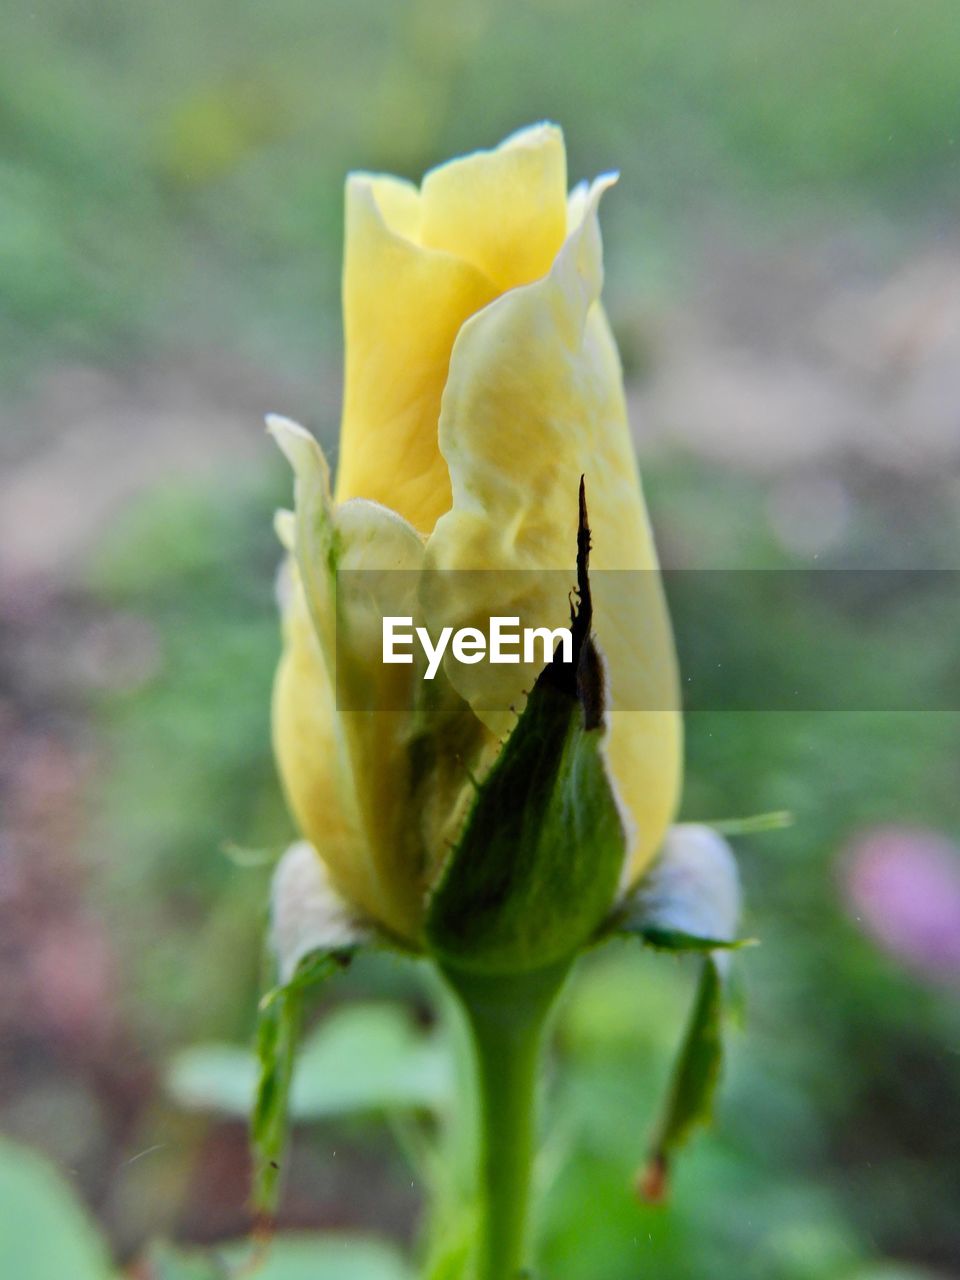 CLOSE-UP OF YELLOW ROSE FLOWER BUD